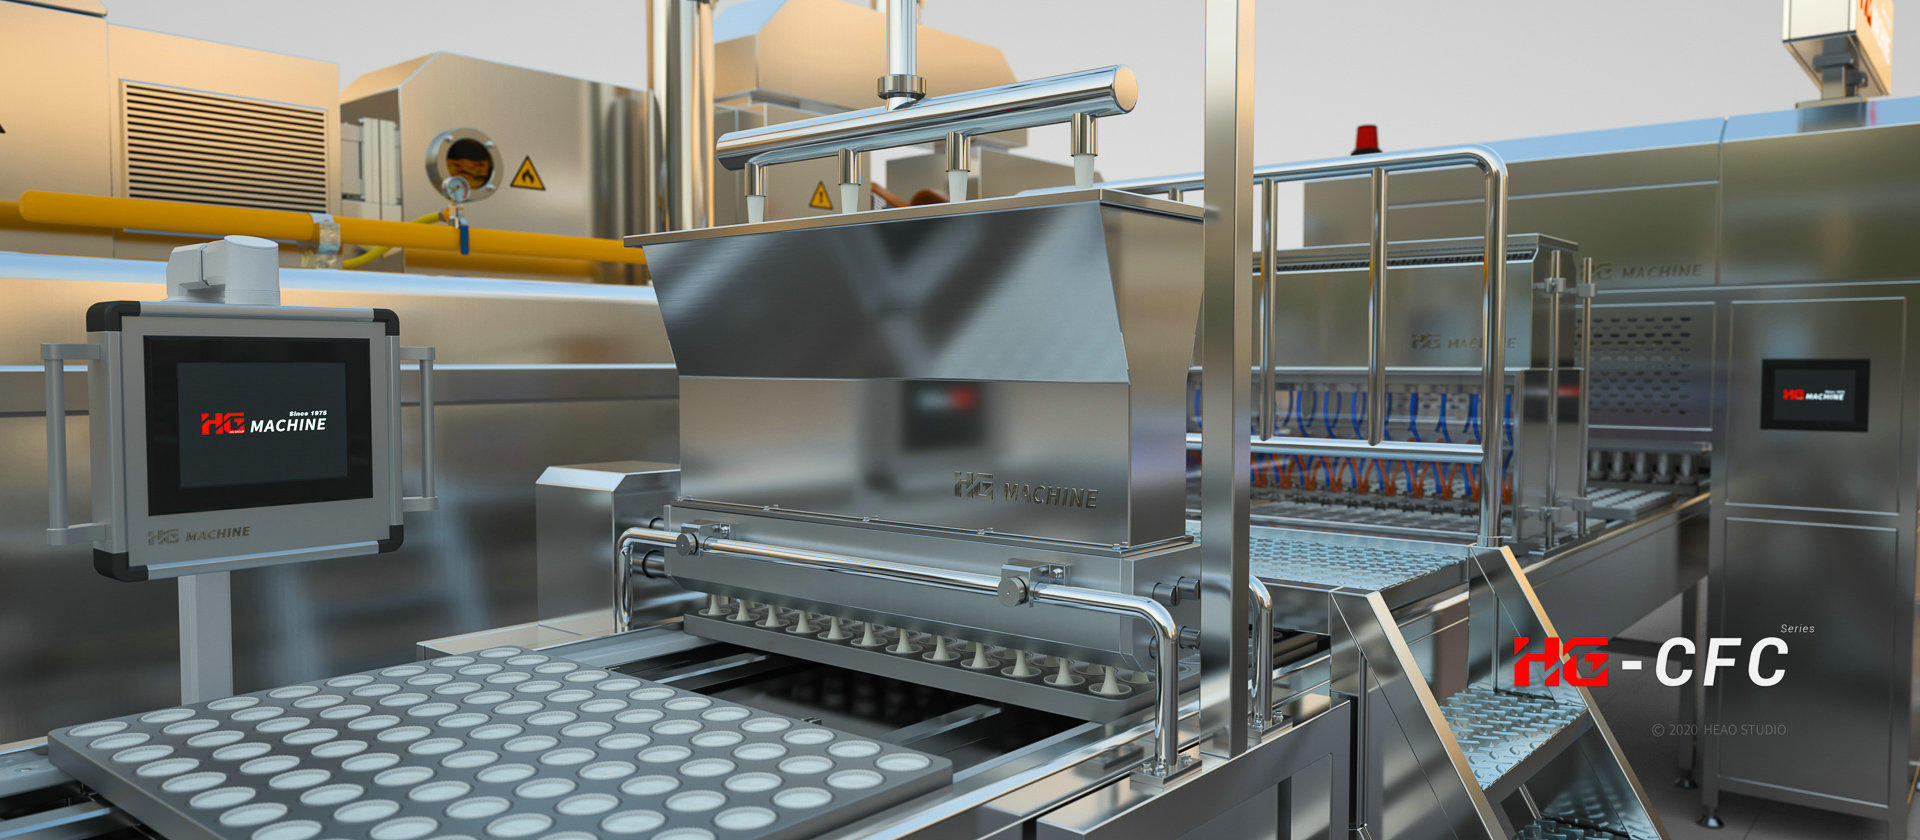 Foreign media selected five new food machinery products